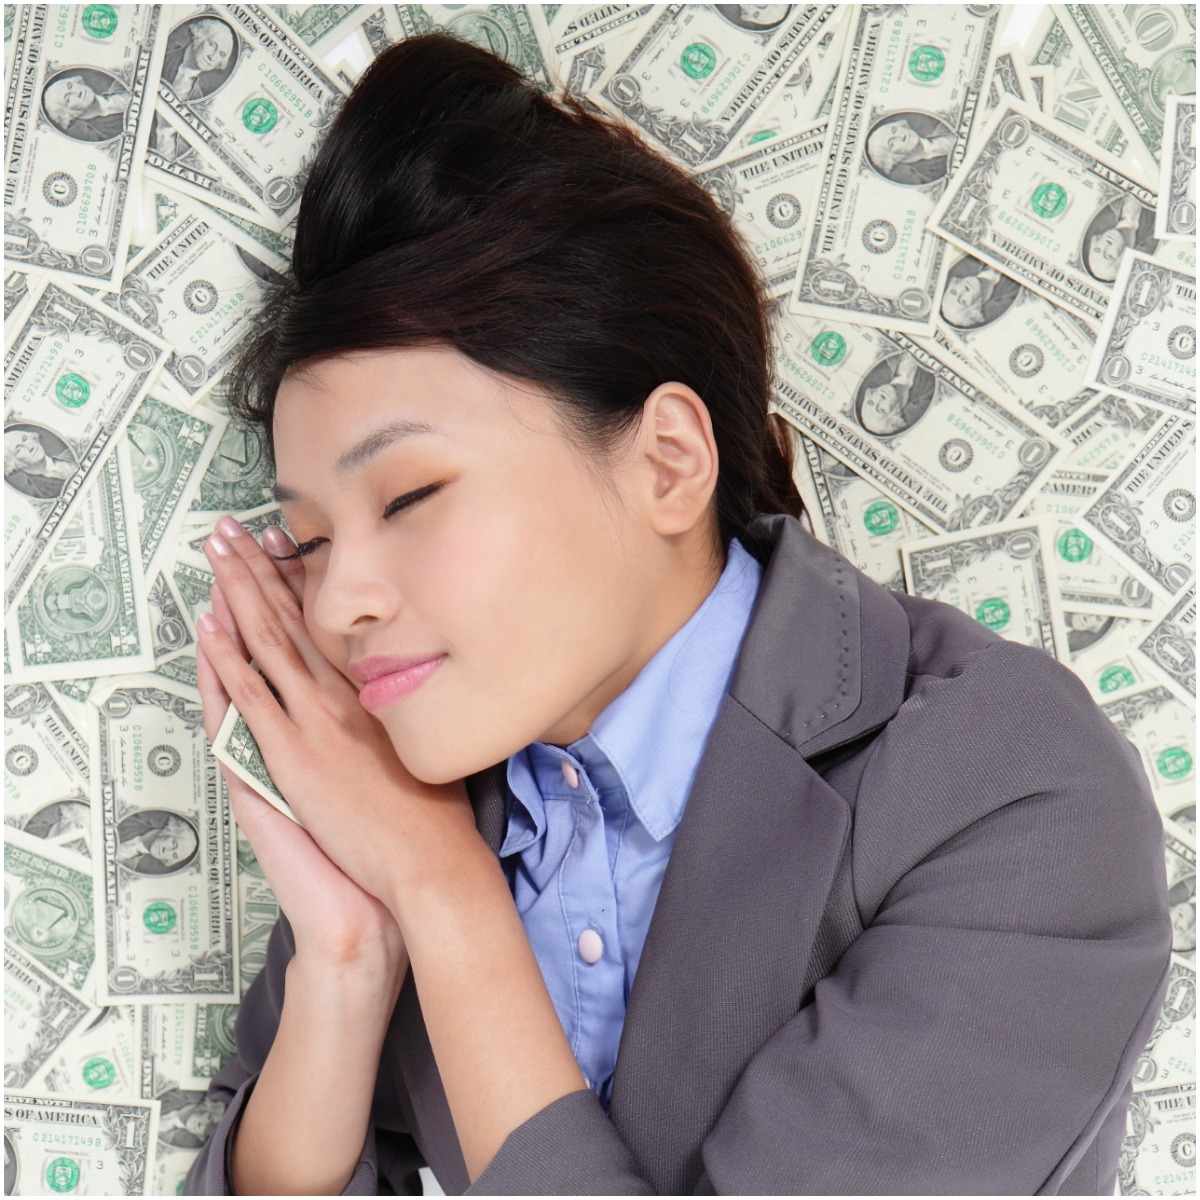 Dreaming of money